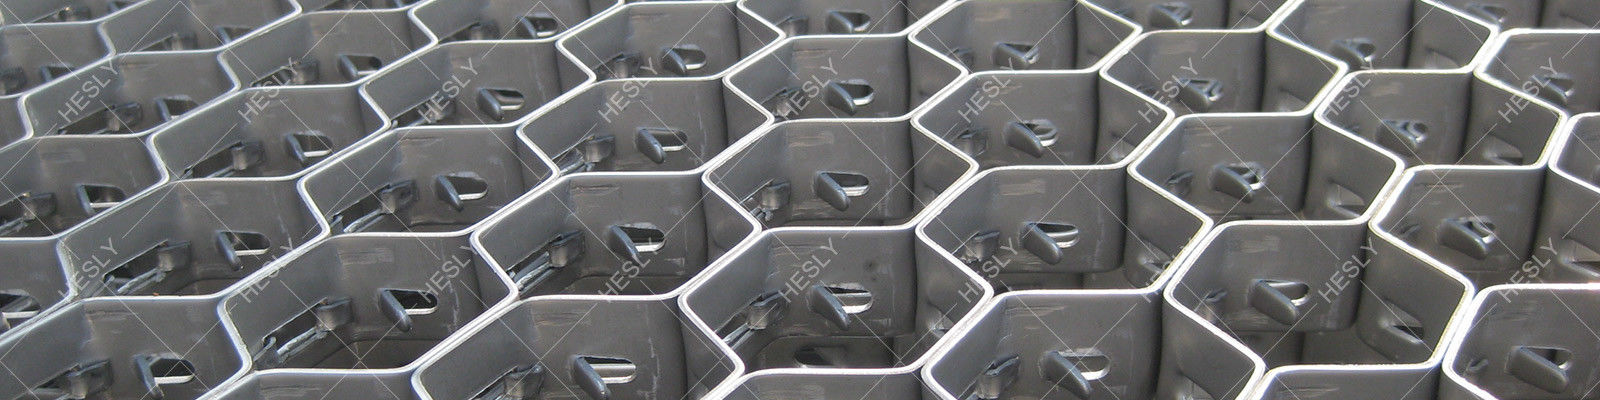 321 Hexmetal for Refractory Lining | Standard Lances | 1" x 16 gauge | 2" hexagonal hole - Hesly China Factory exporter